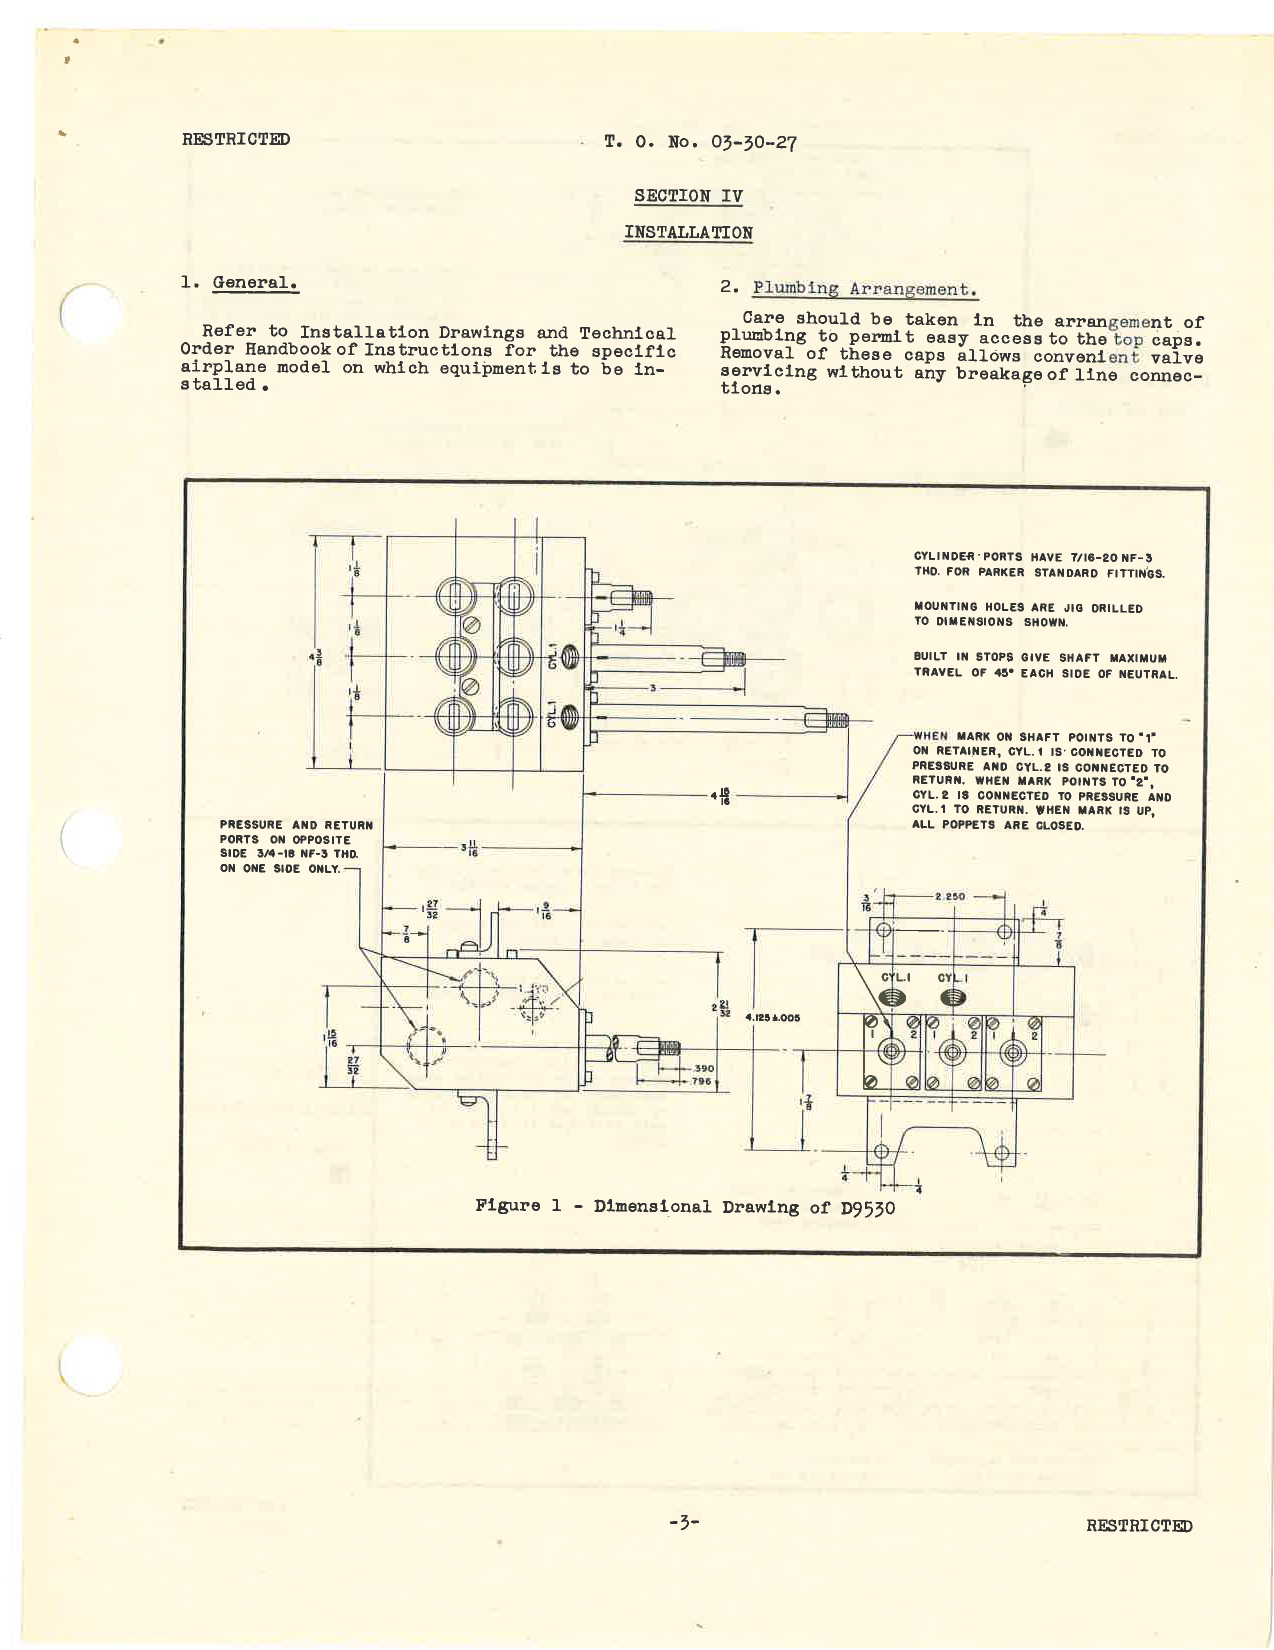 Sample page 5 from AirCorps Library document: Handbook of Instructions with Parts Catalog for Hydraulic Selector Valves